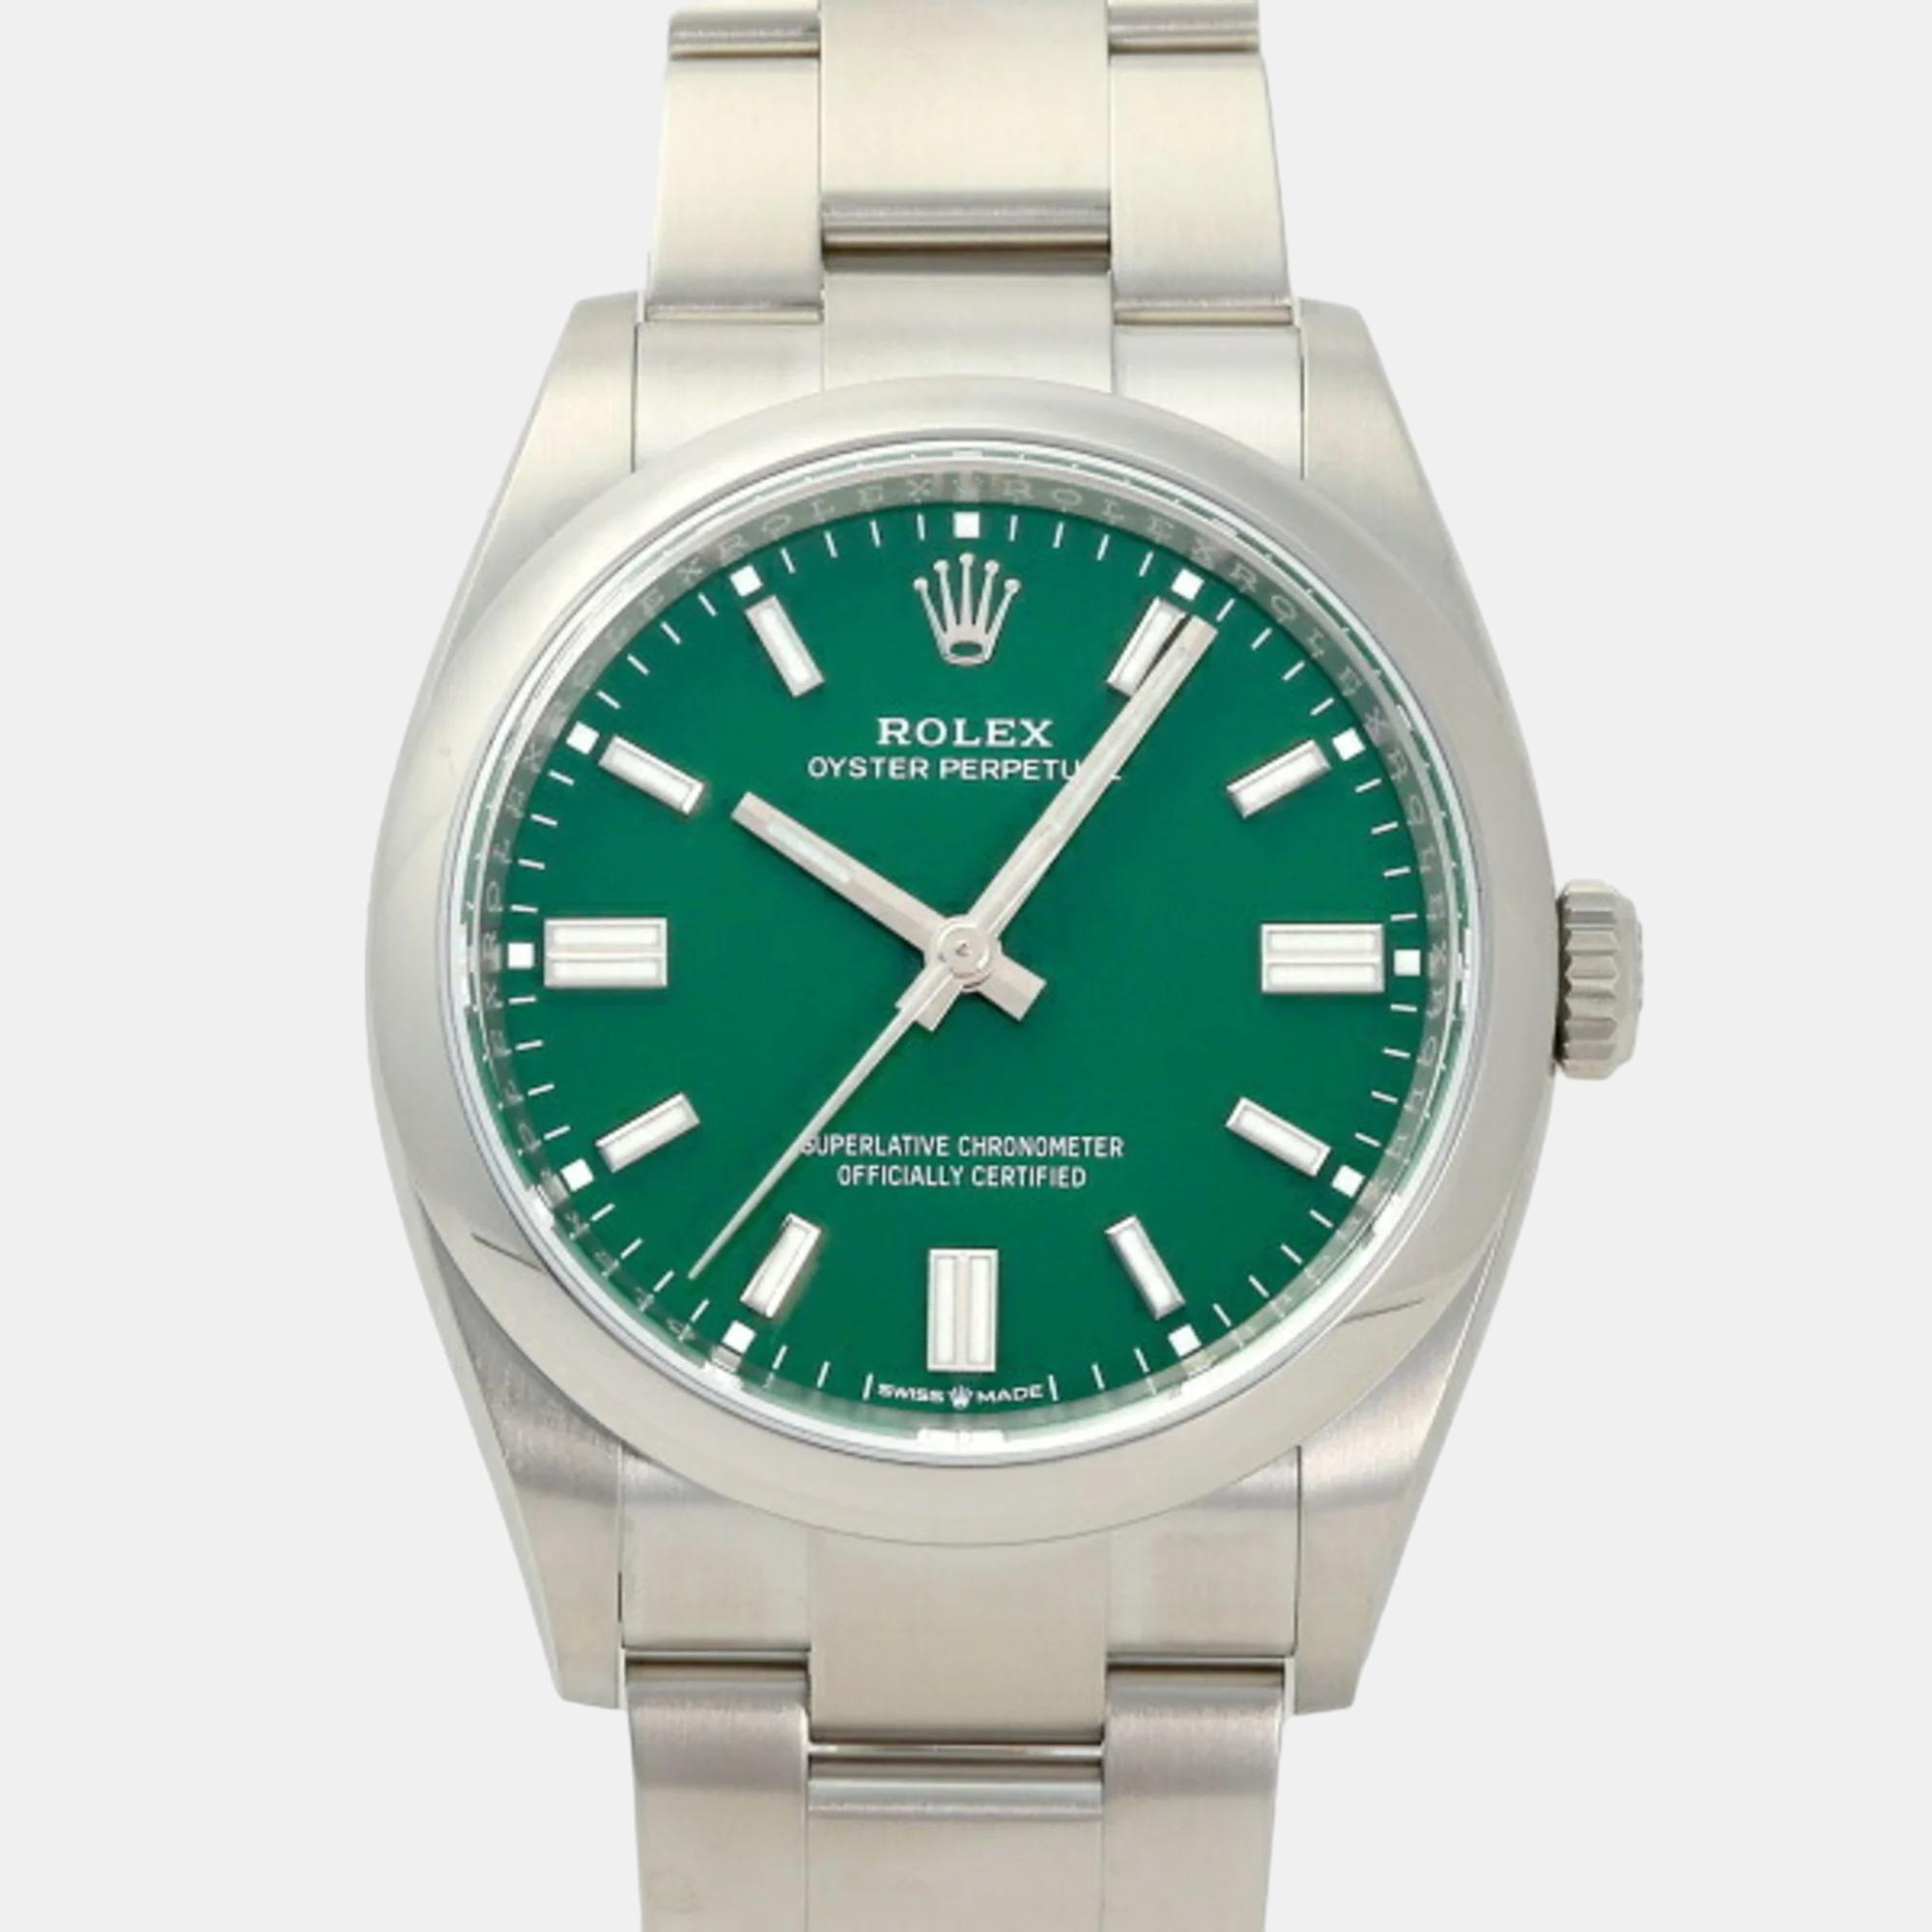 Rolex green stainless steel oyster perpetual 126000 men's watch 36mm